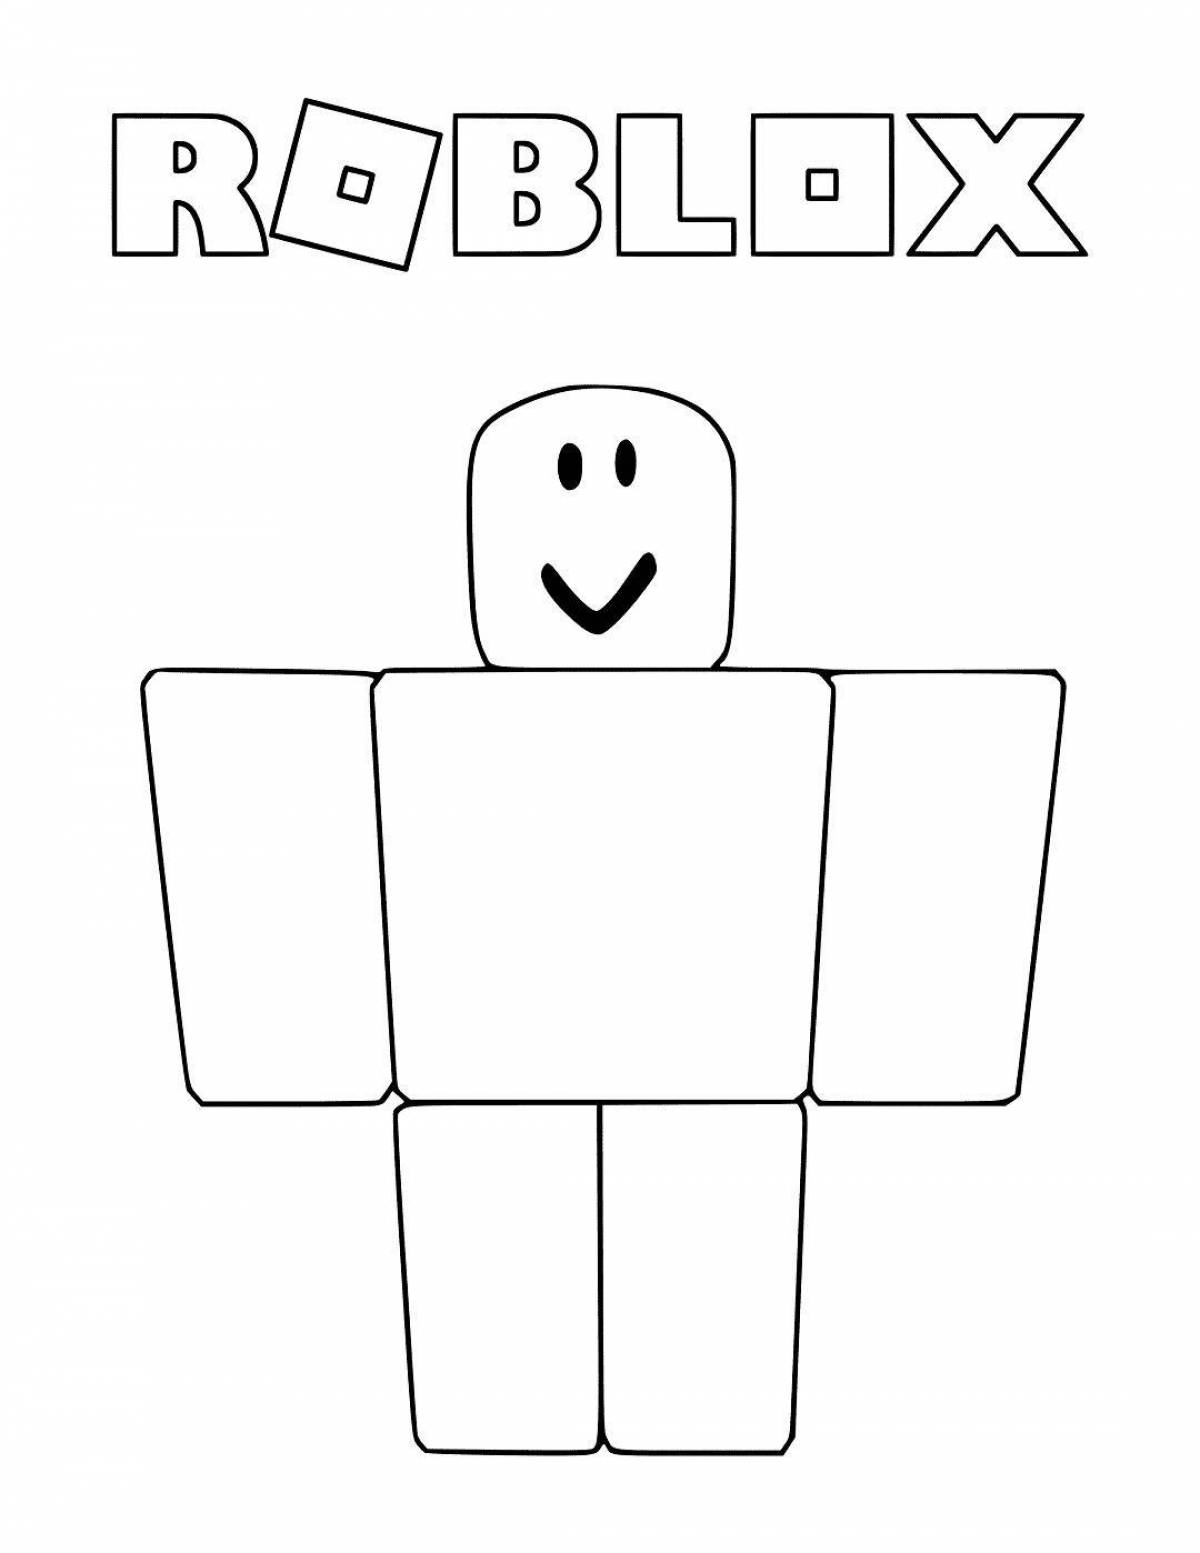 Roblox coloring by numbers